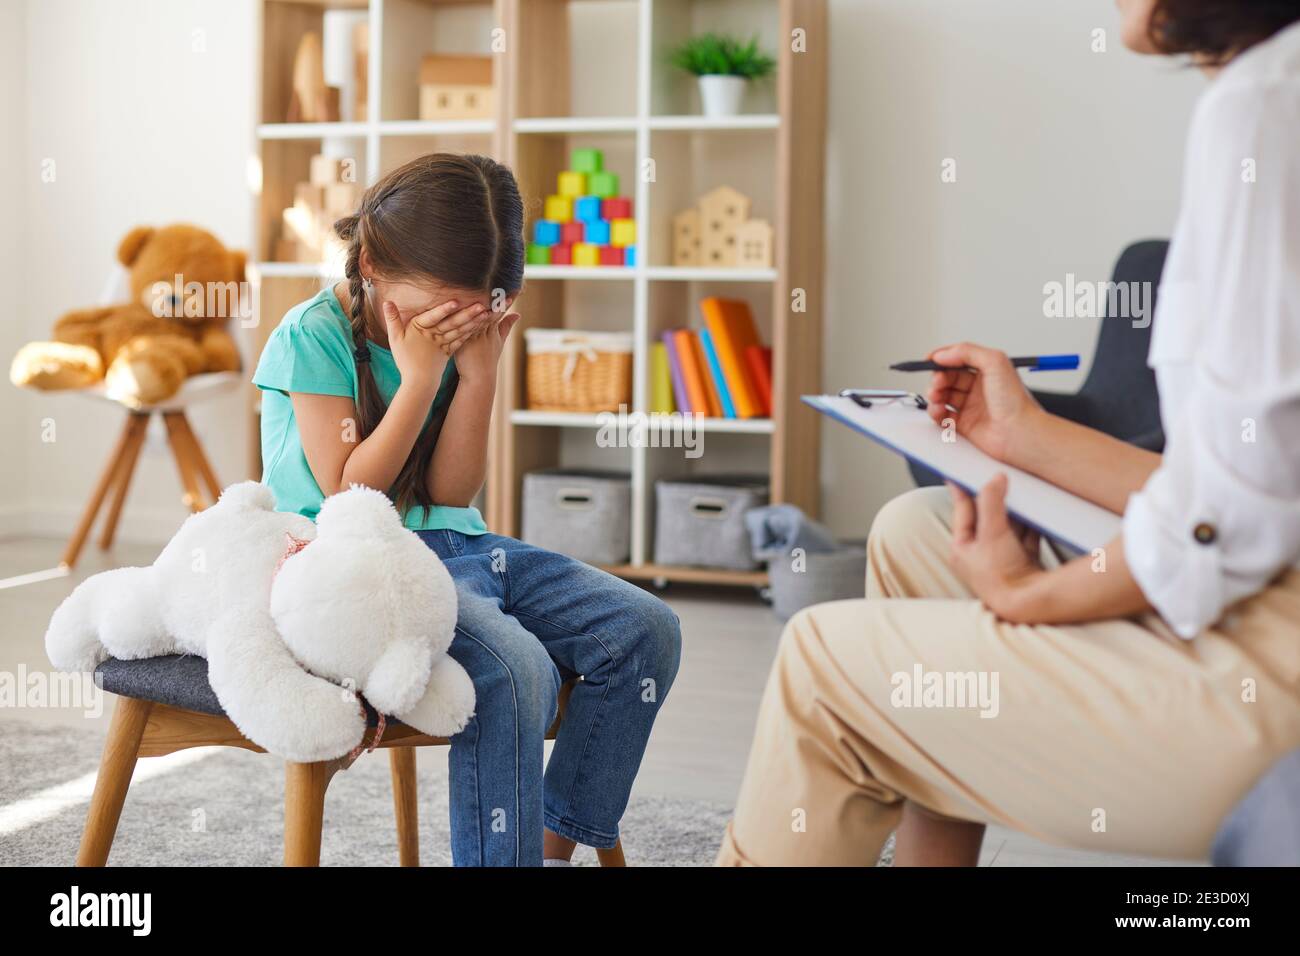 Bullying victim crying in psychotherapist's office unloading problems and seeking help Stock Photo